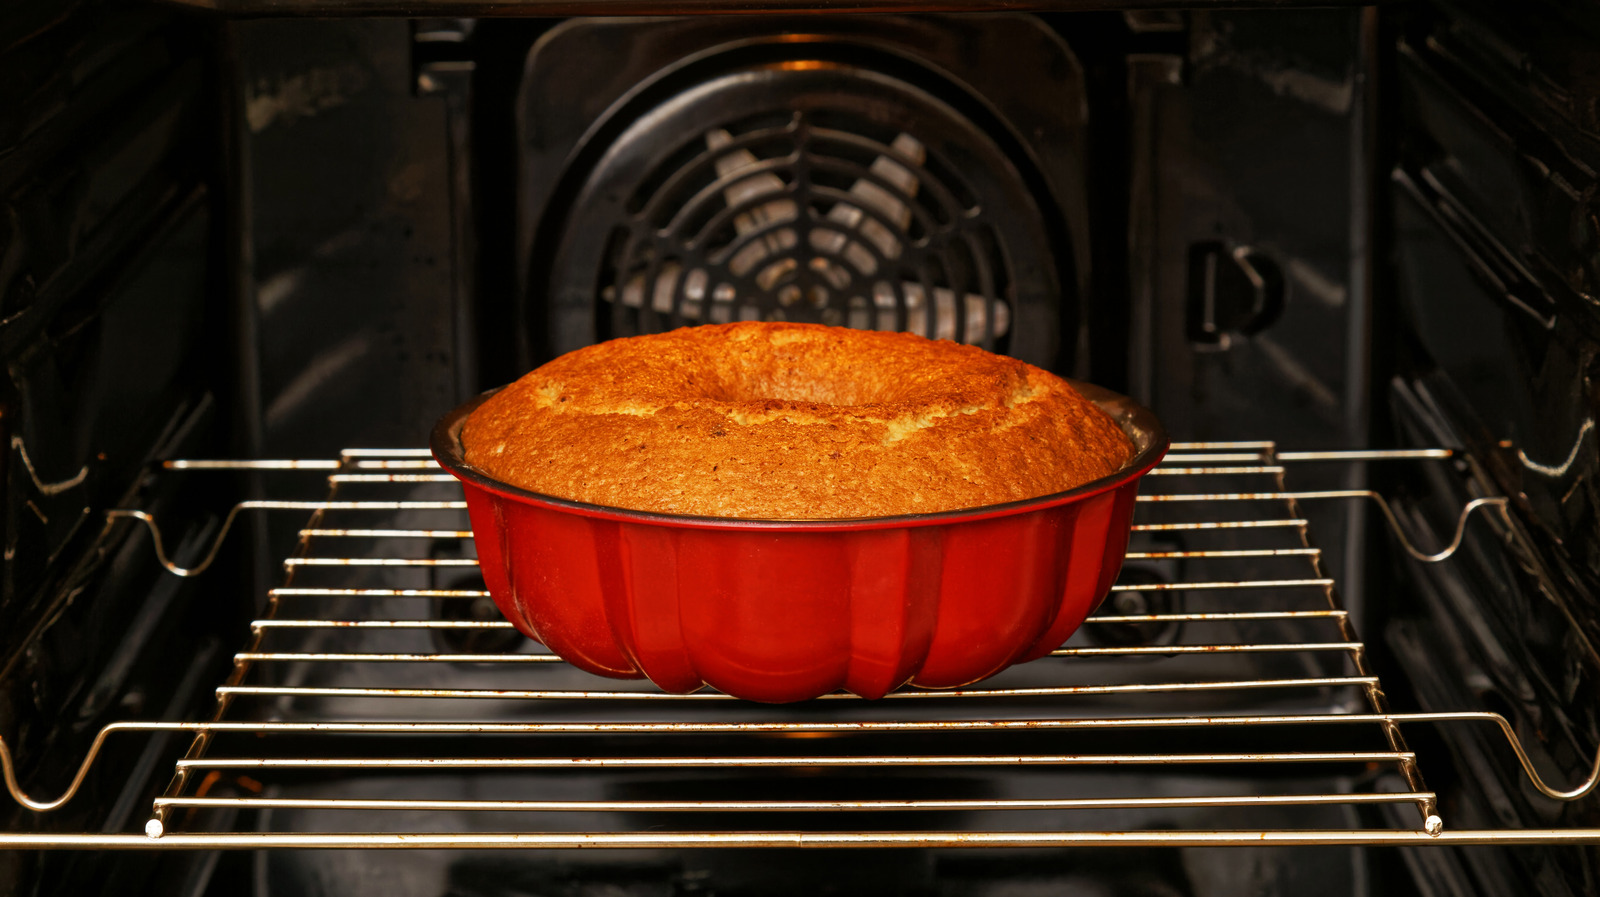 Cheesecake In The Oven After Baking Step By Step Recipe From The Internet  Stock Photo - Download Image Now - iStock